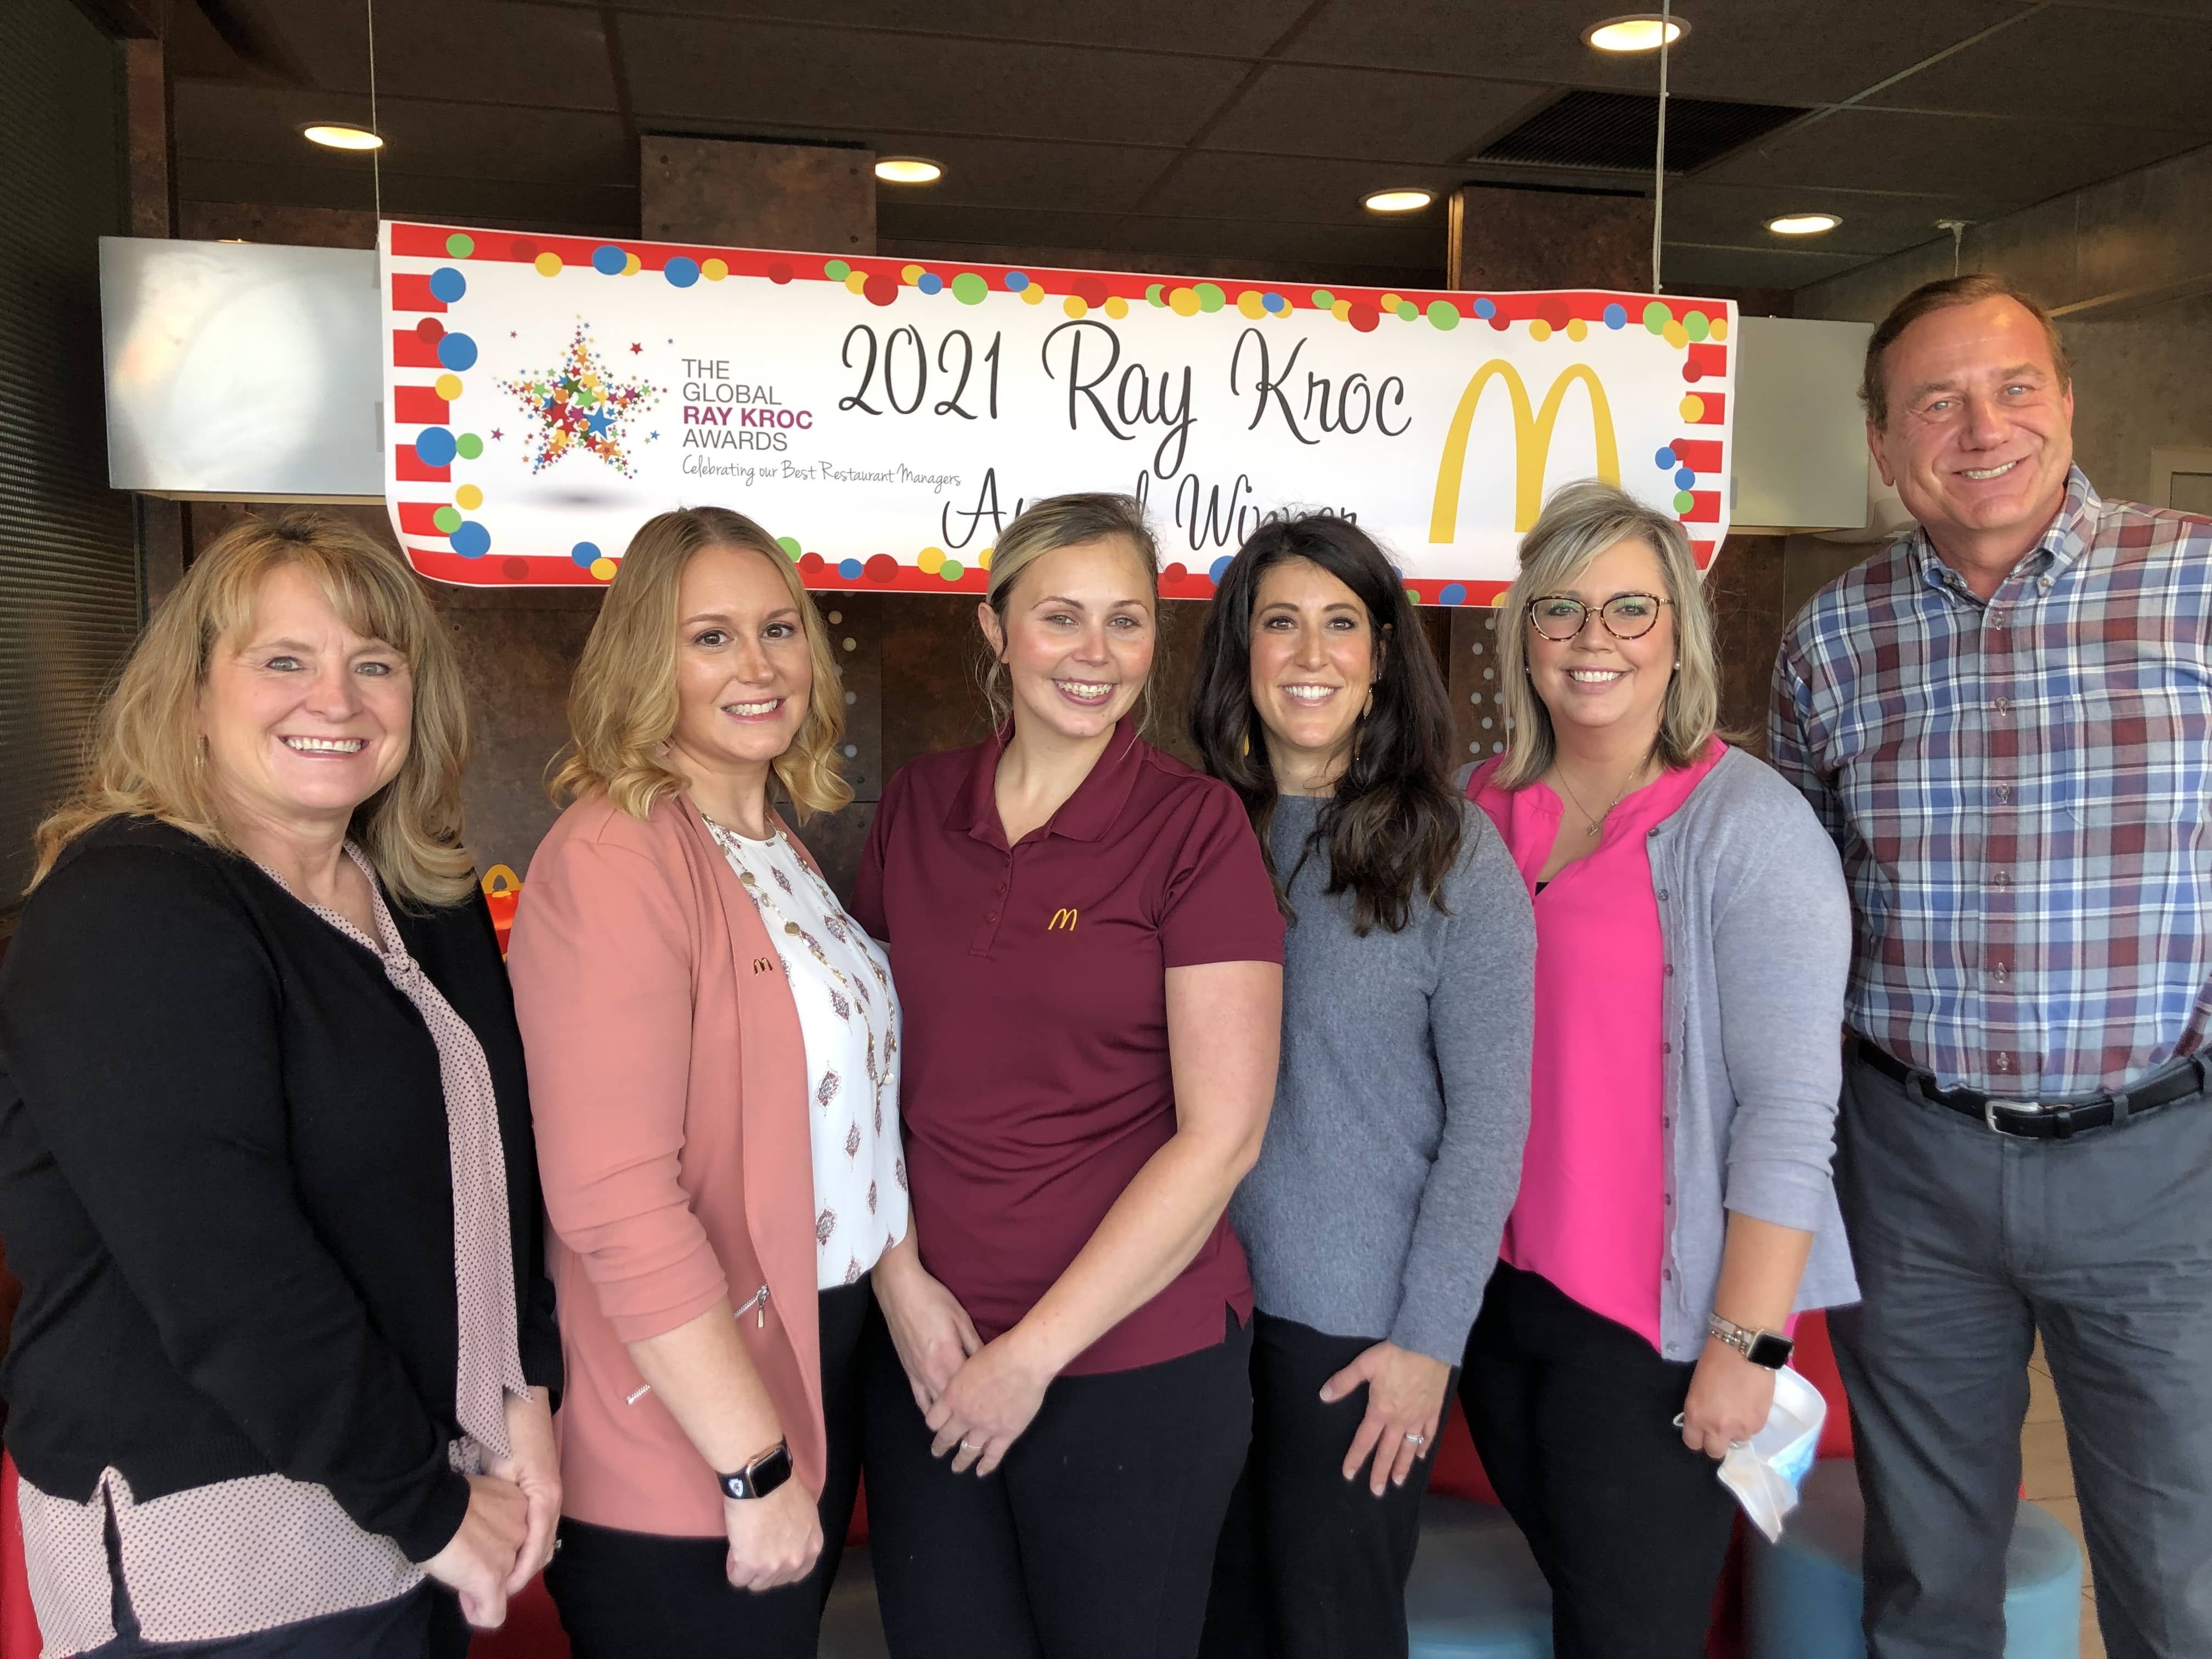 Leitchfield McDonald's Manager Receives Ray Kroc Award; Given to Top